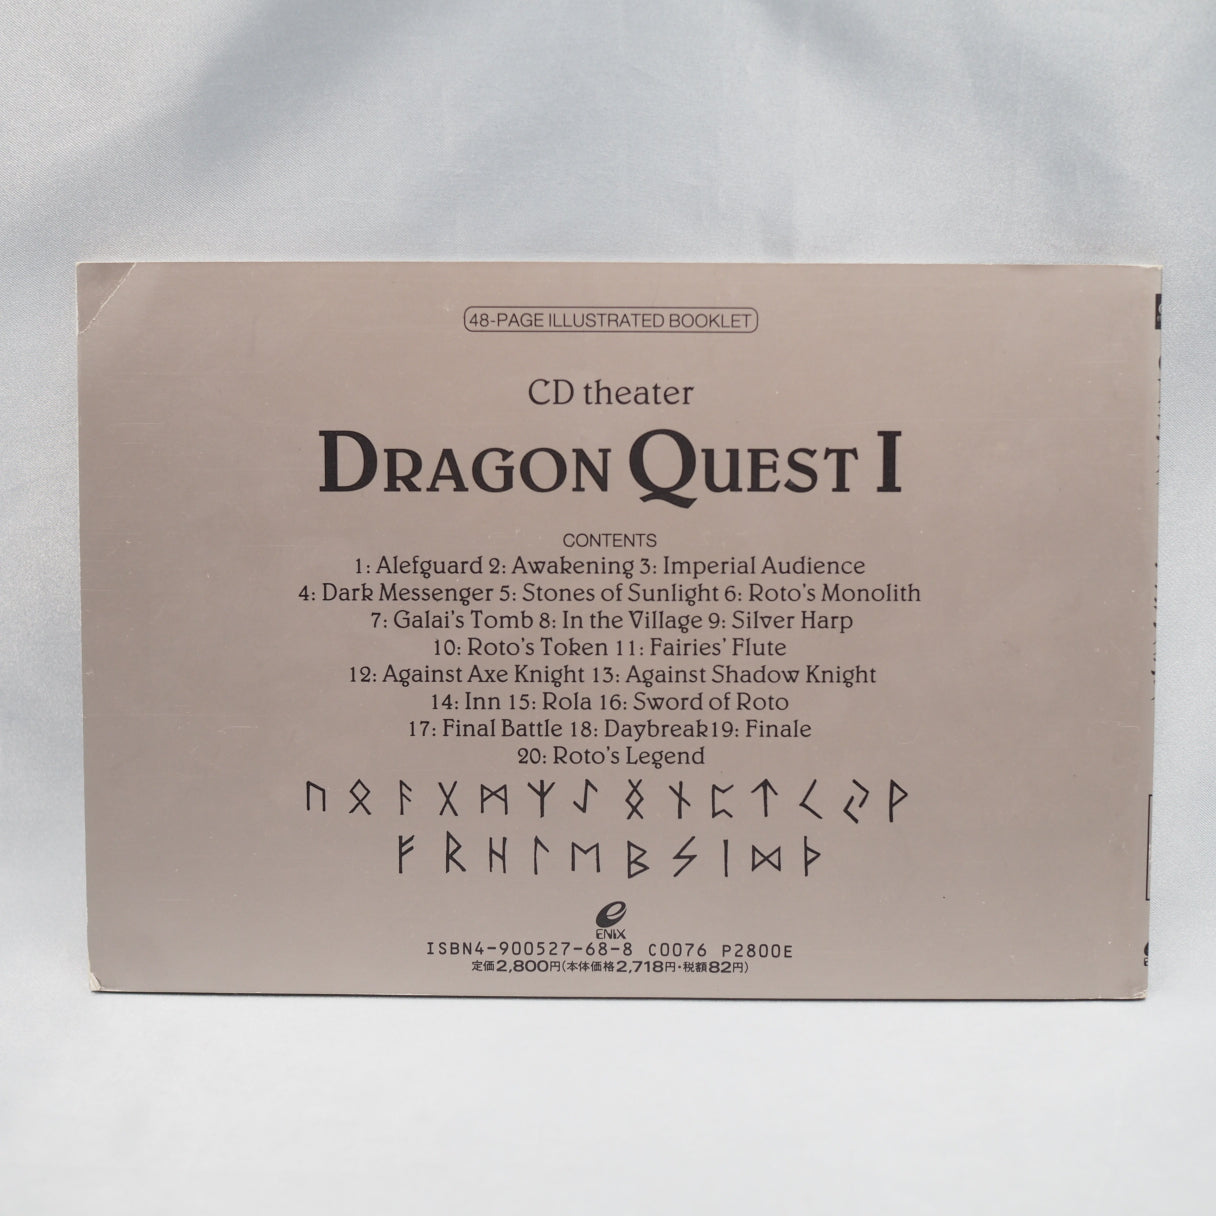 CD theater Dragon Quest 1 [Sound Drama CD + Illustrated Booklet]